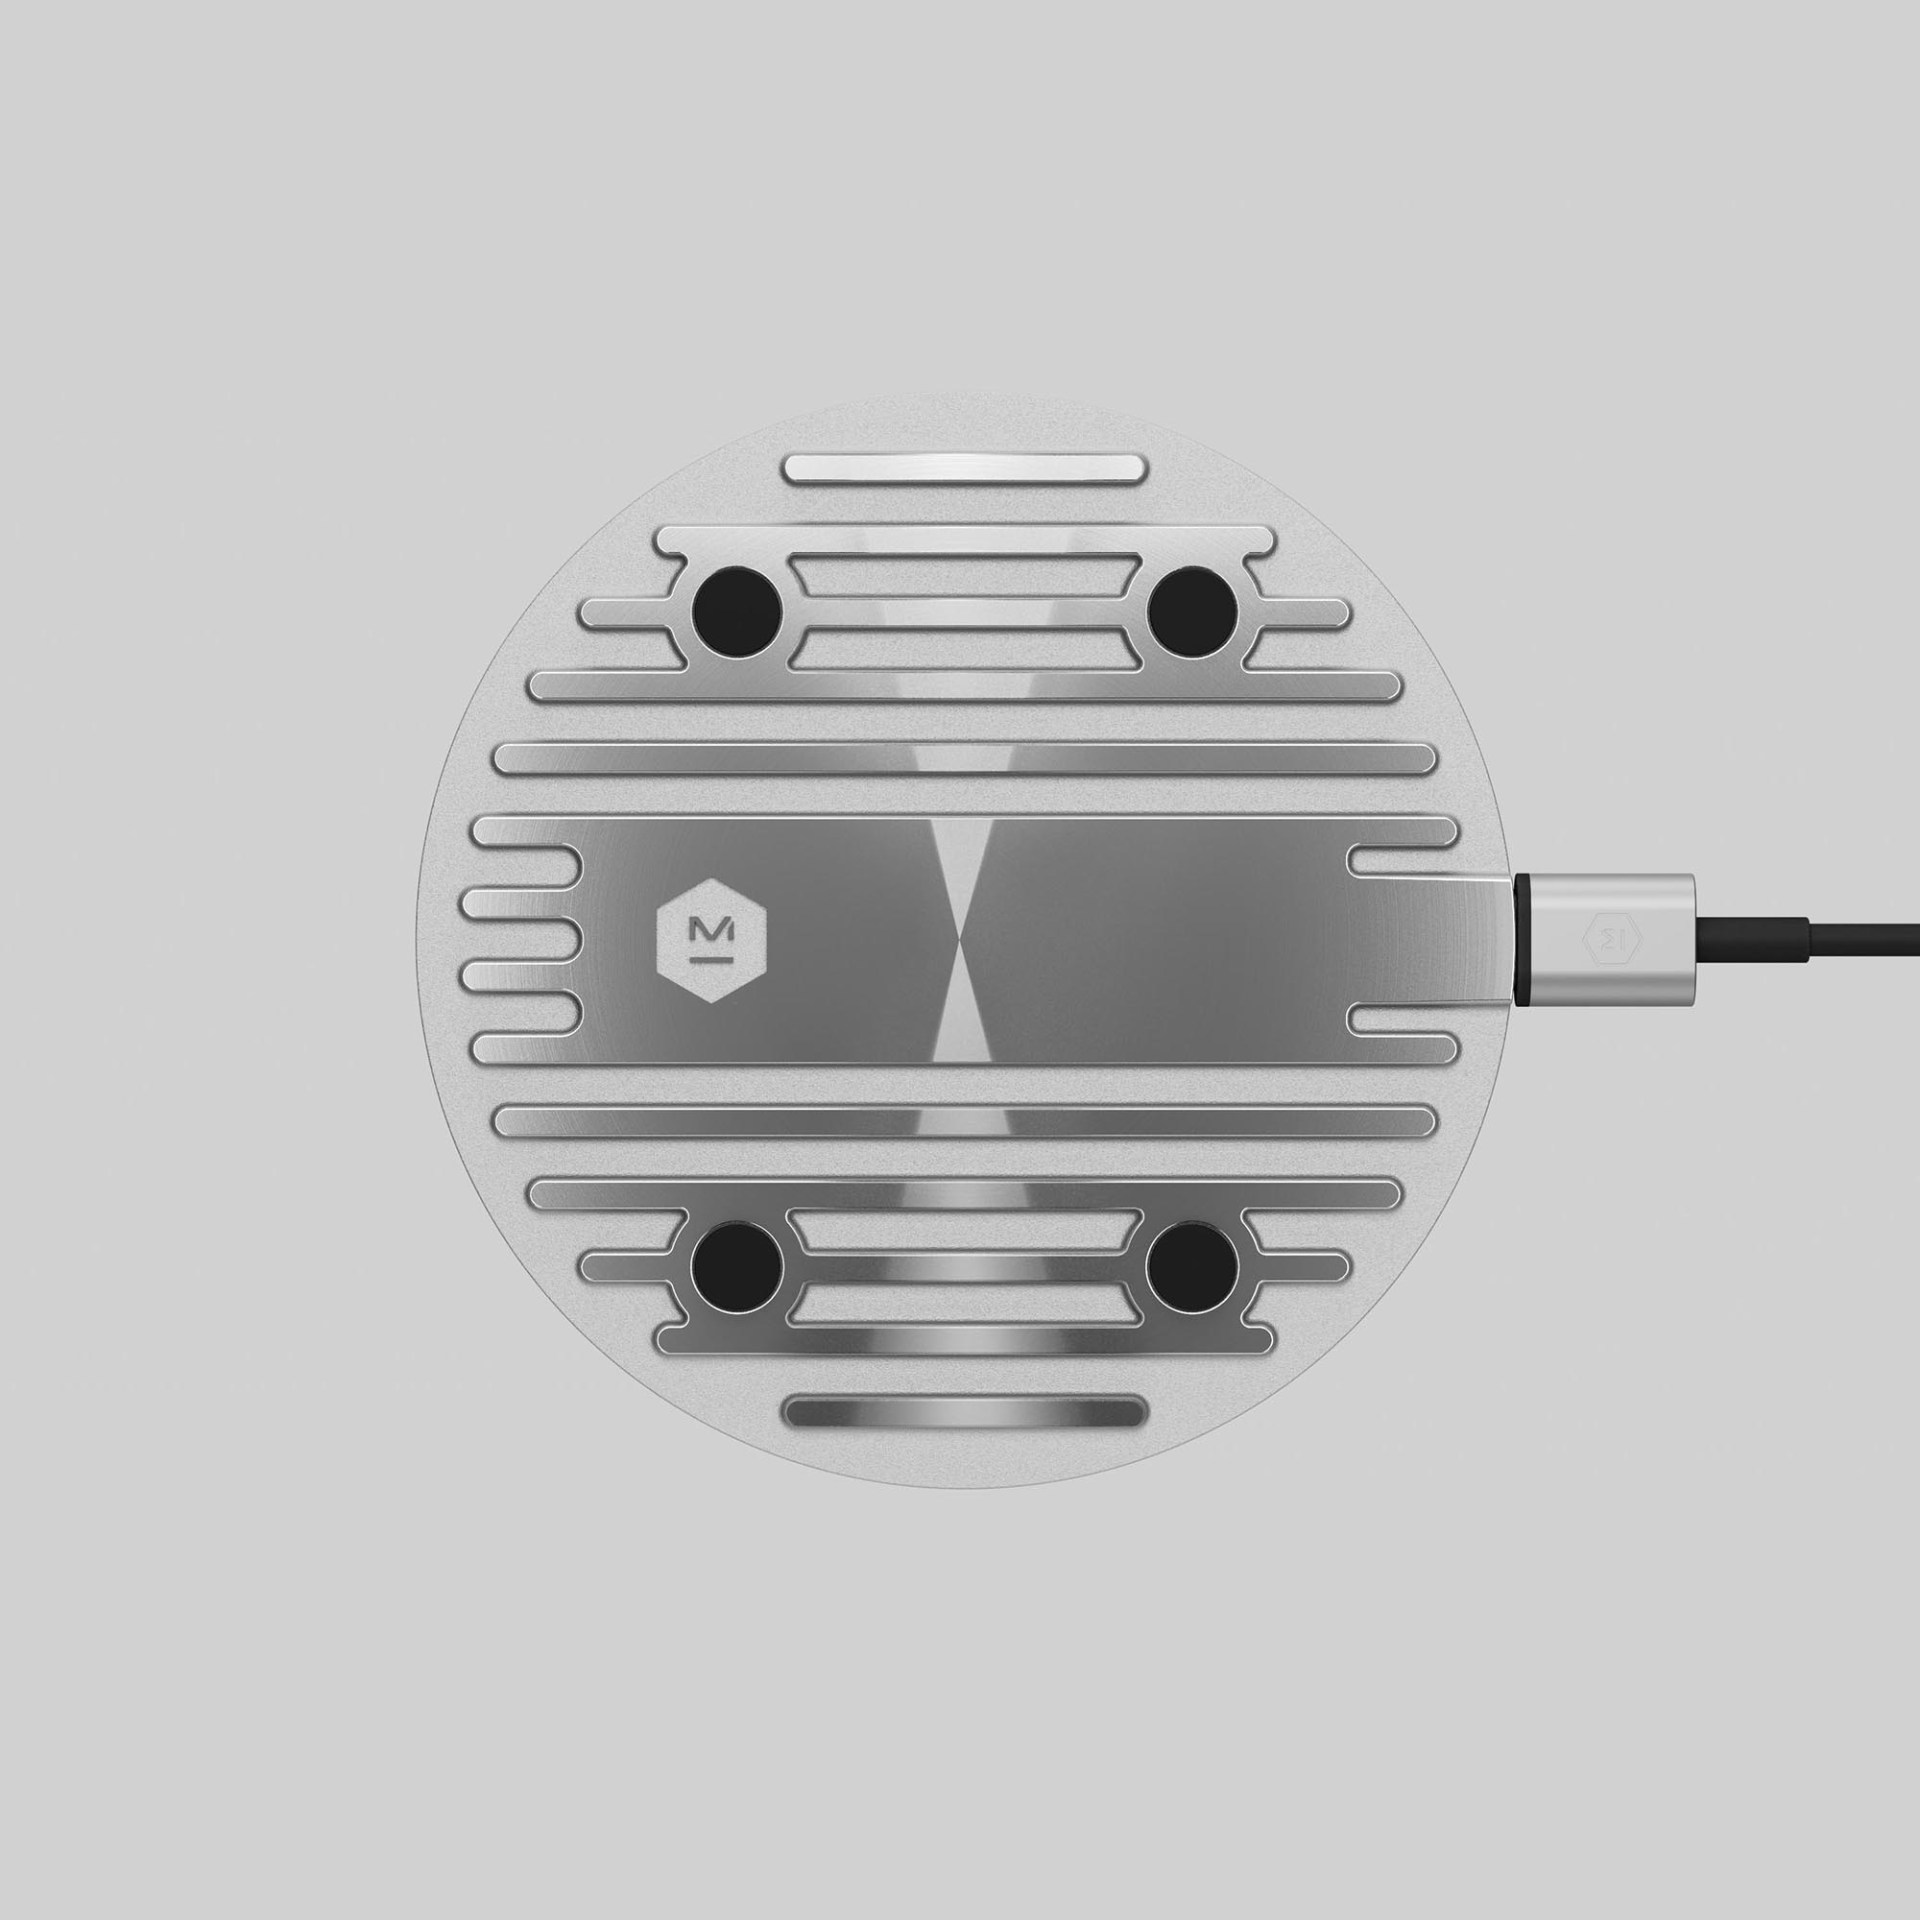 MC100 Wireless Charging Pad features the same pattern as on our original MH40 Headphones driver plates